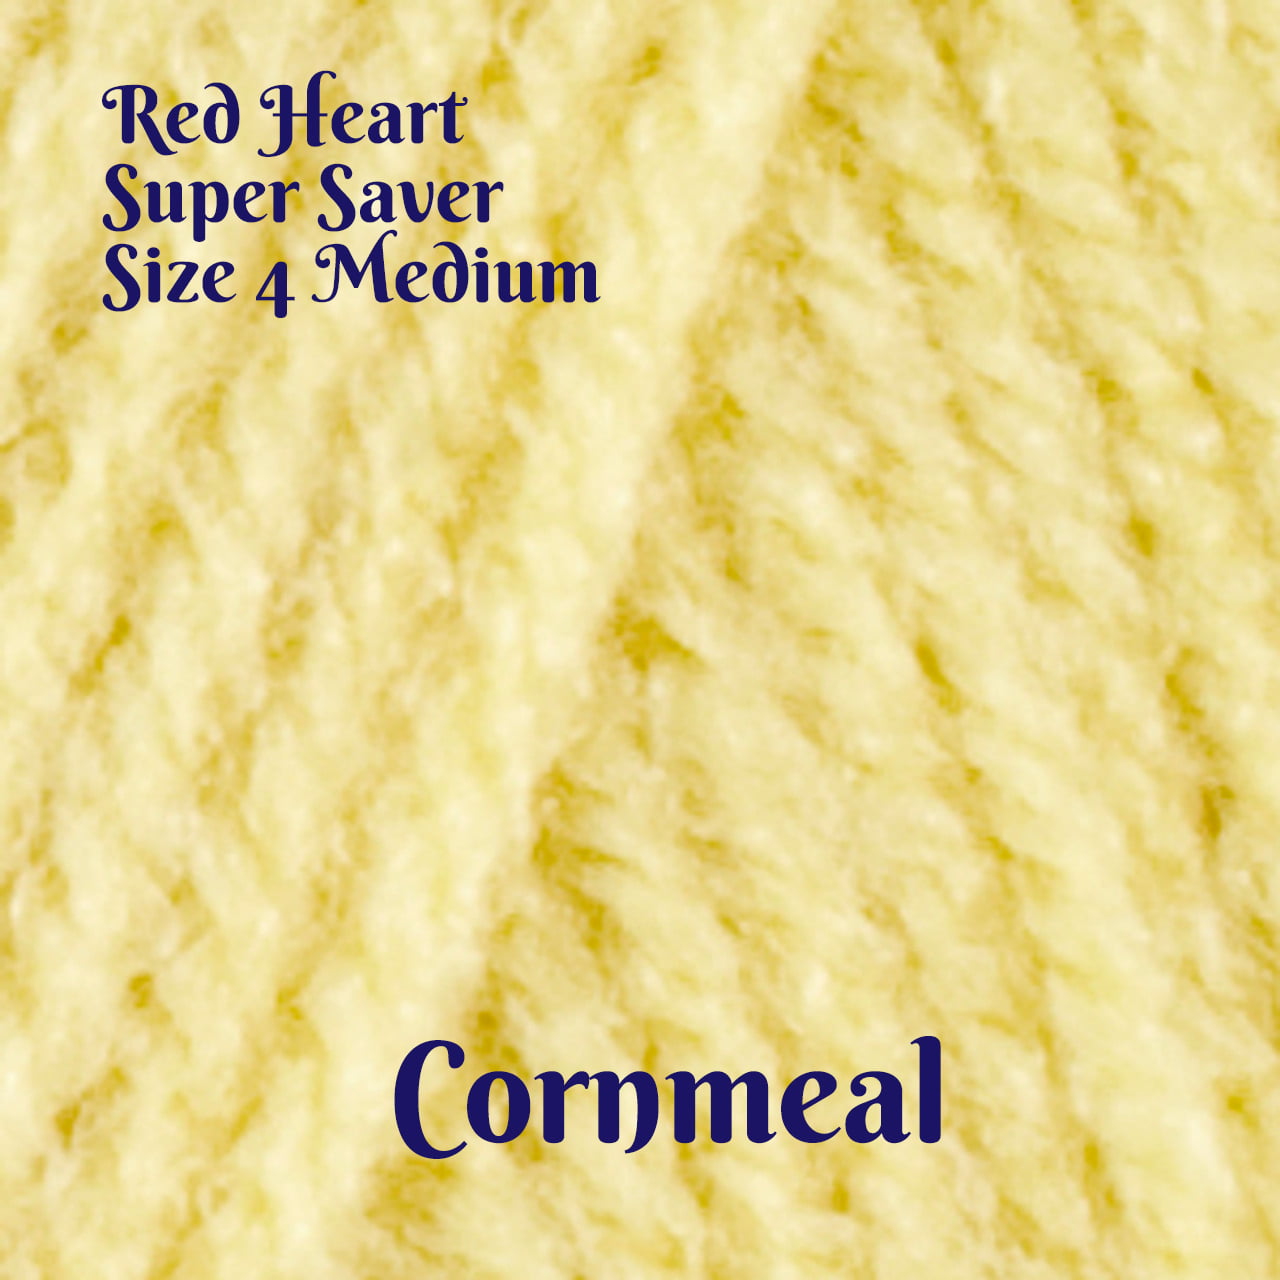 Red Heart Super Saver Yarn-Wildflowers, 1 count - City Market